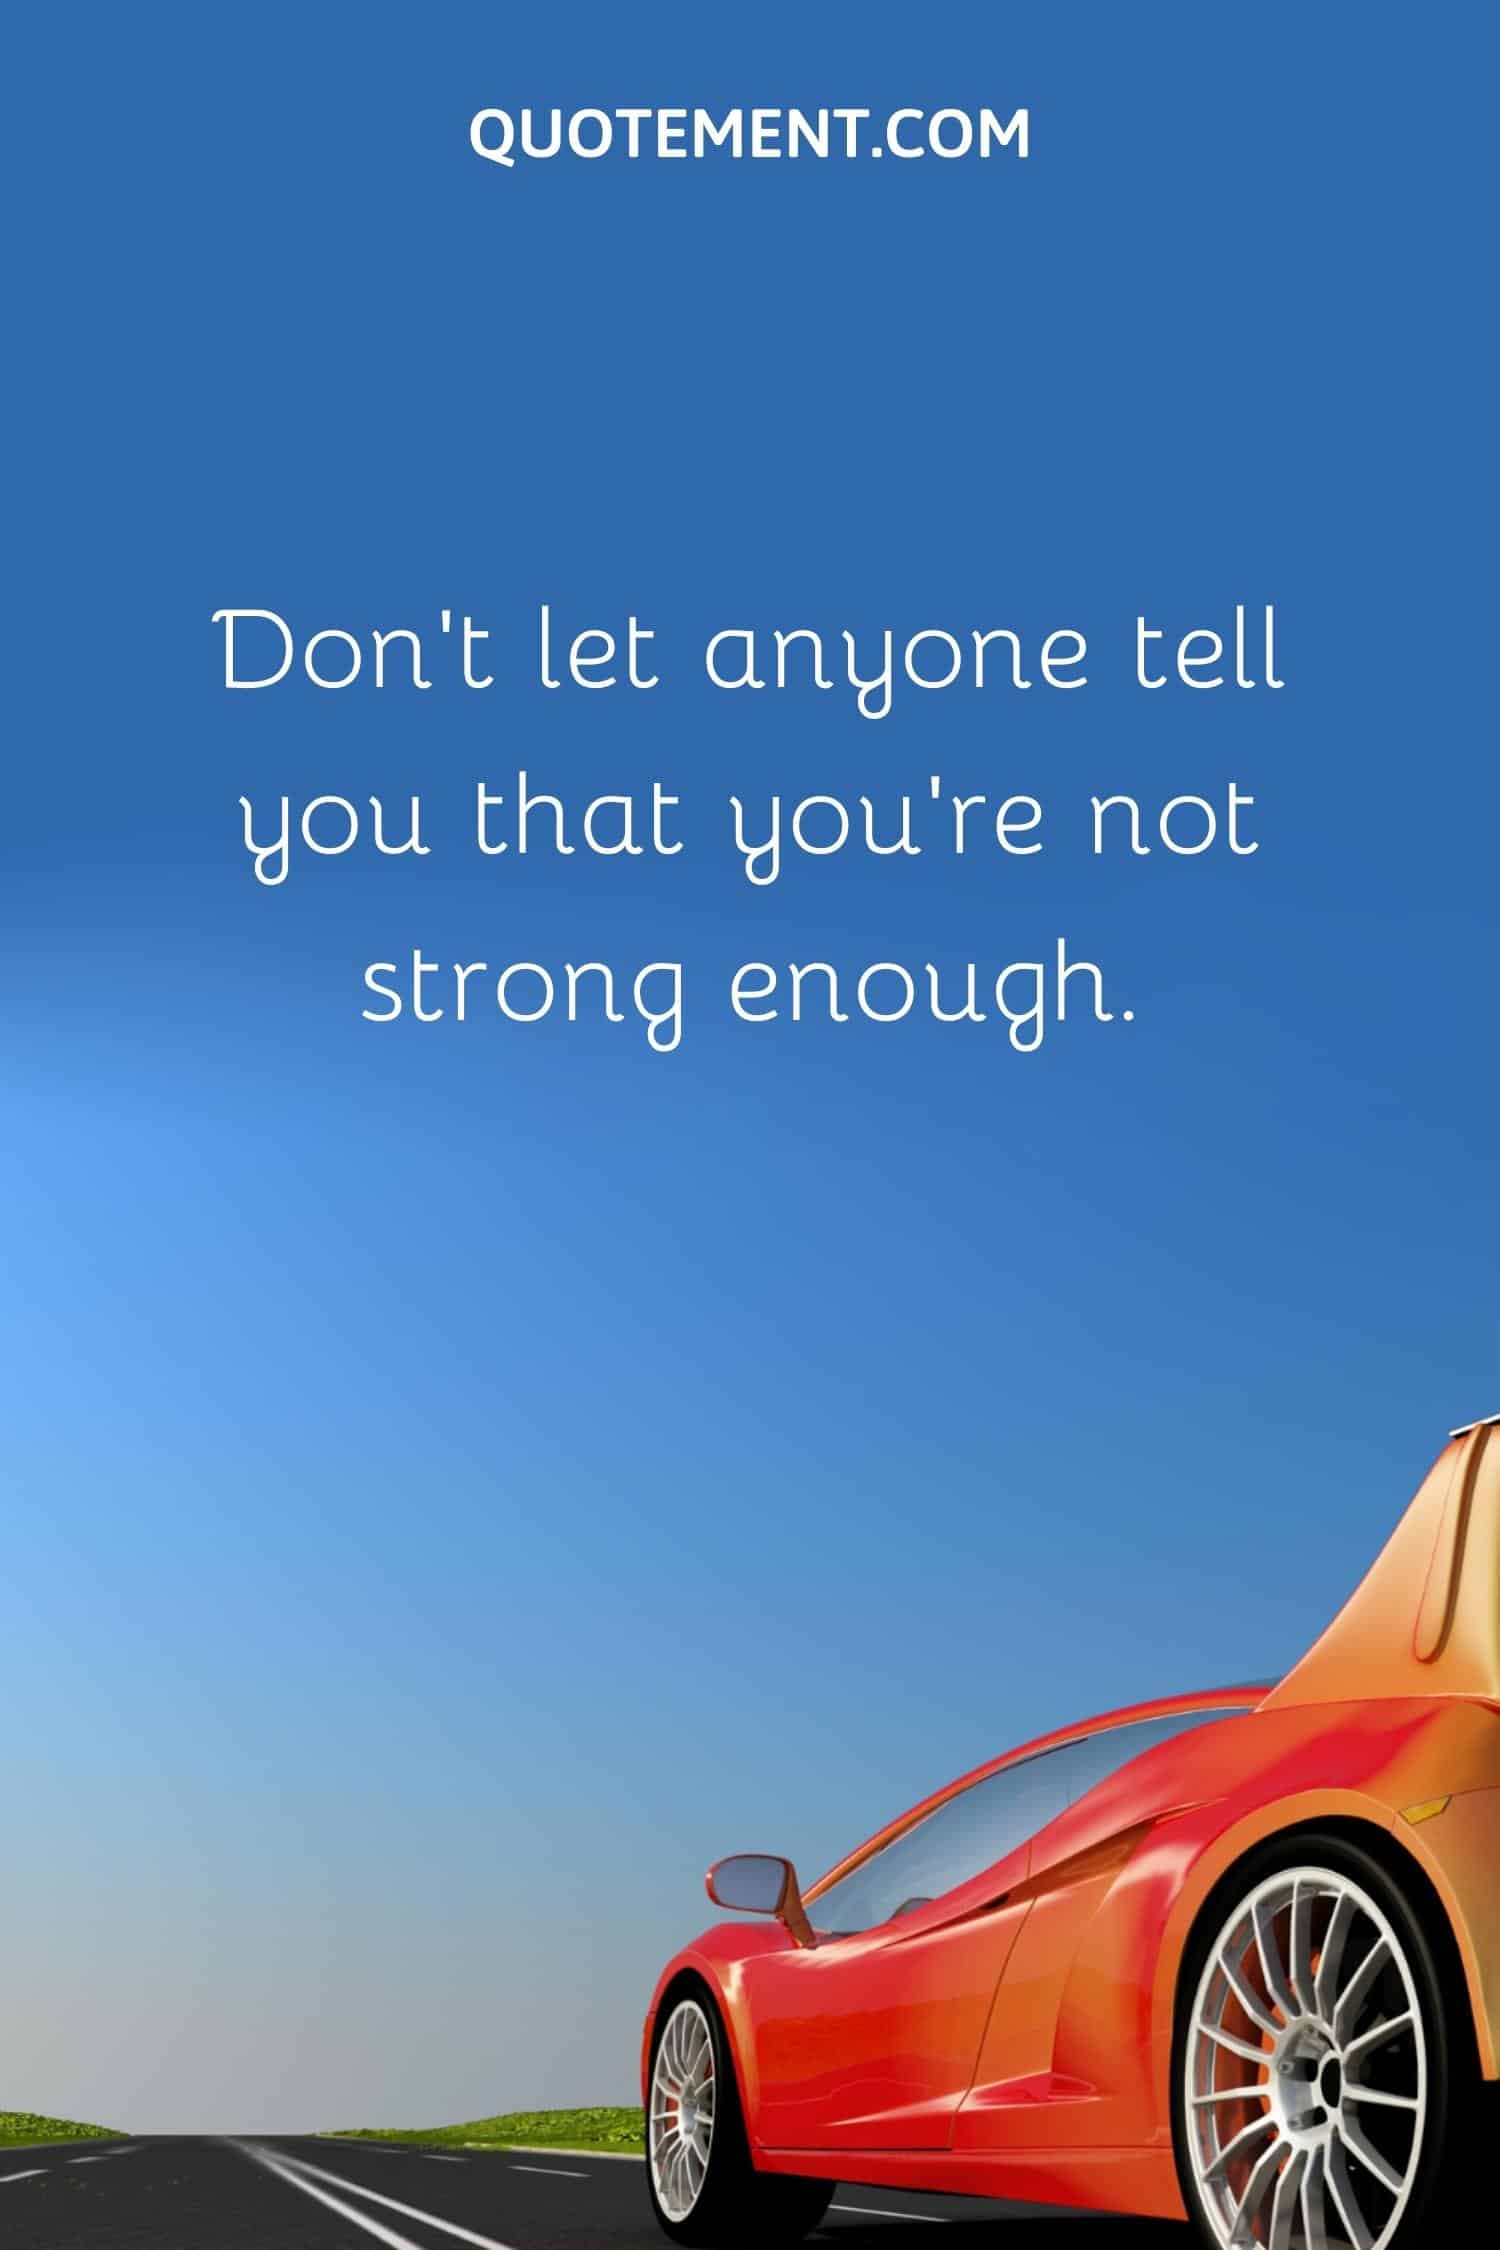 Don’t let anyone tell you that you’re not strong enough